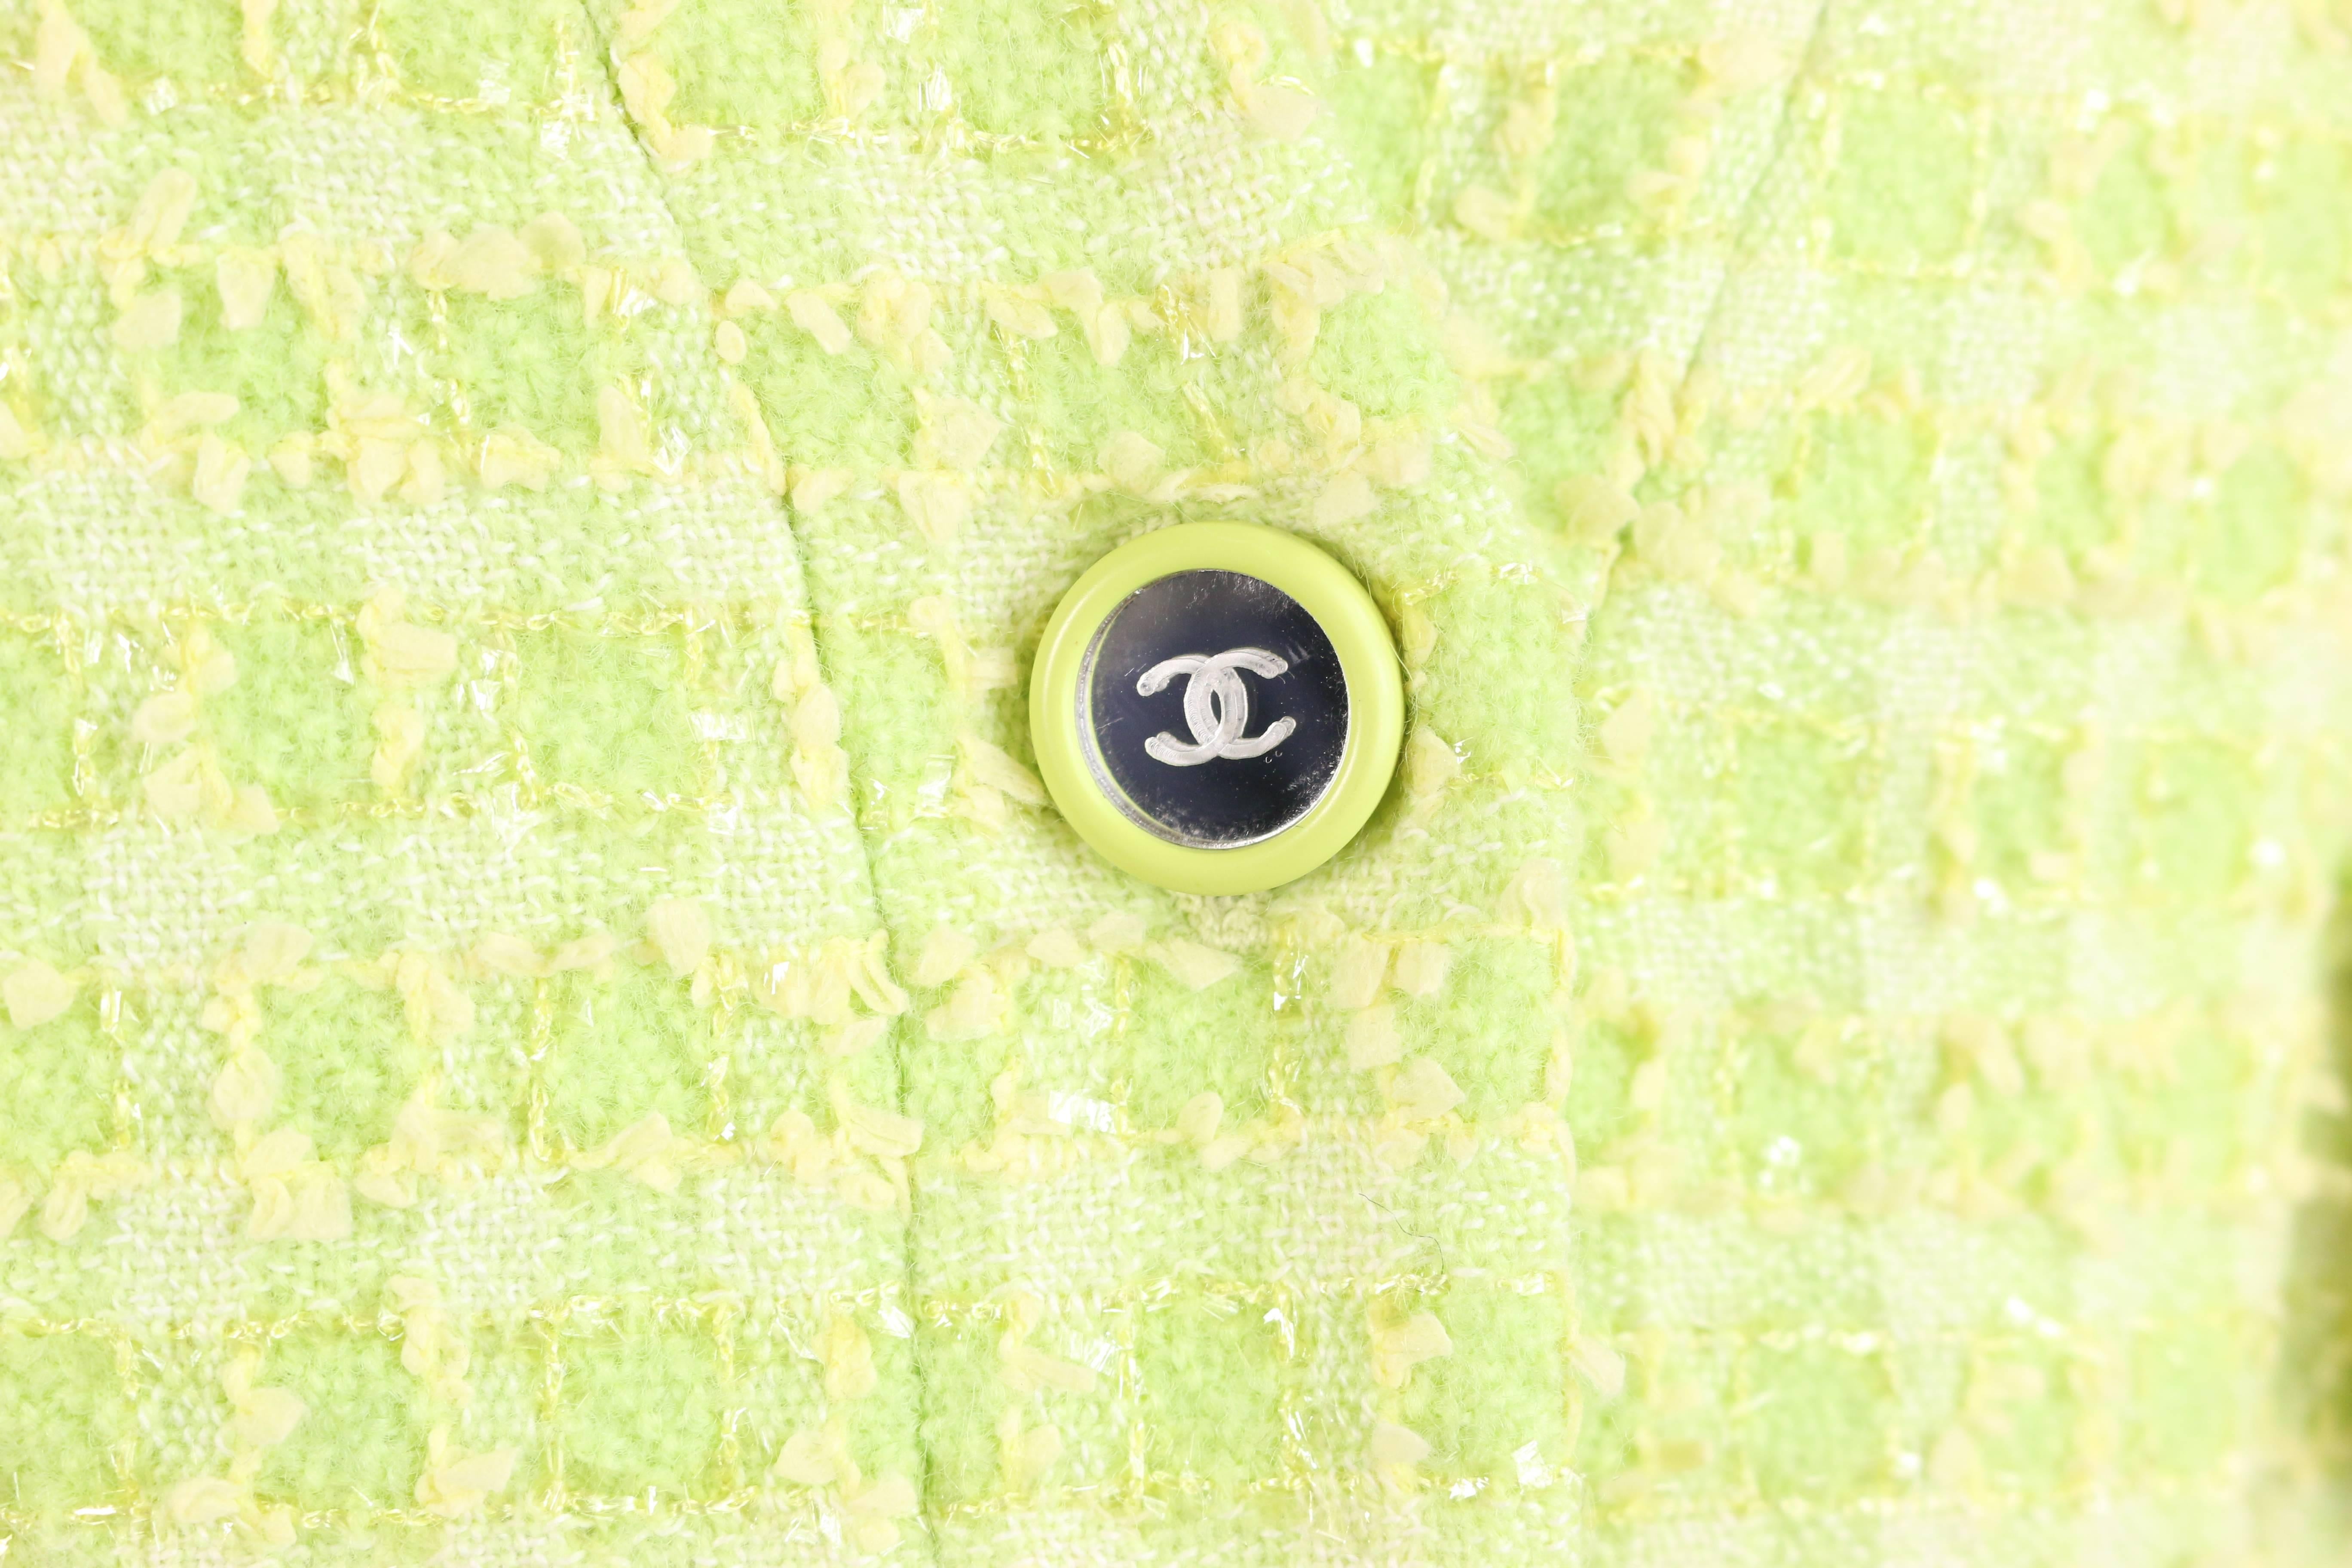 - Vintage Chanel apple green/white cotton and wool blend iridescent collarless cropped tweed jacket from 1995c collection. 

- Featuring three "CC" mirror front buttons fastening, four front flap pockets. and two "CC" mirror